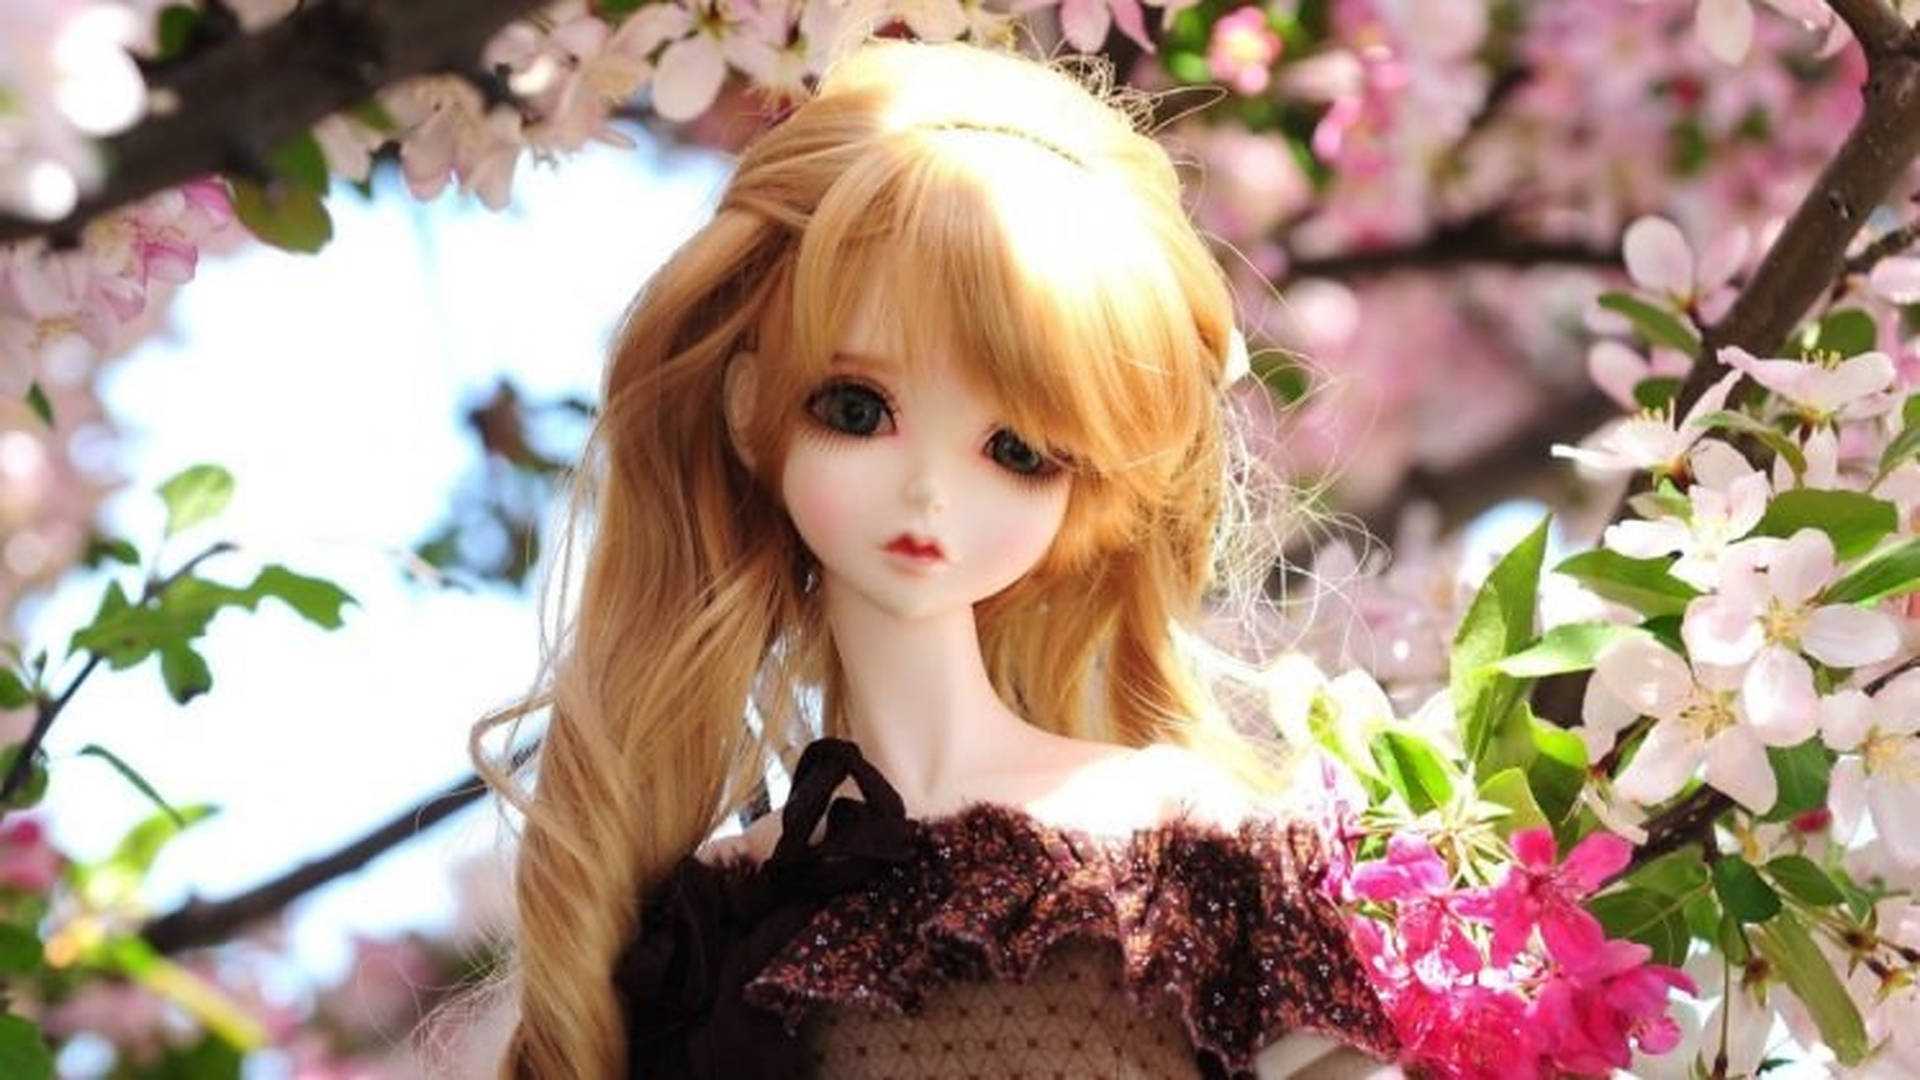 Doll And Cherry Blossoms